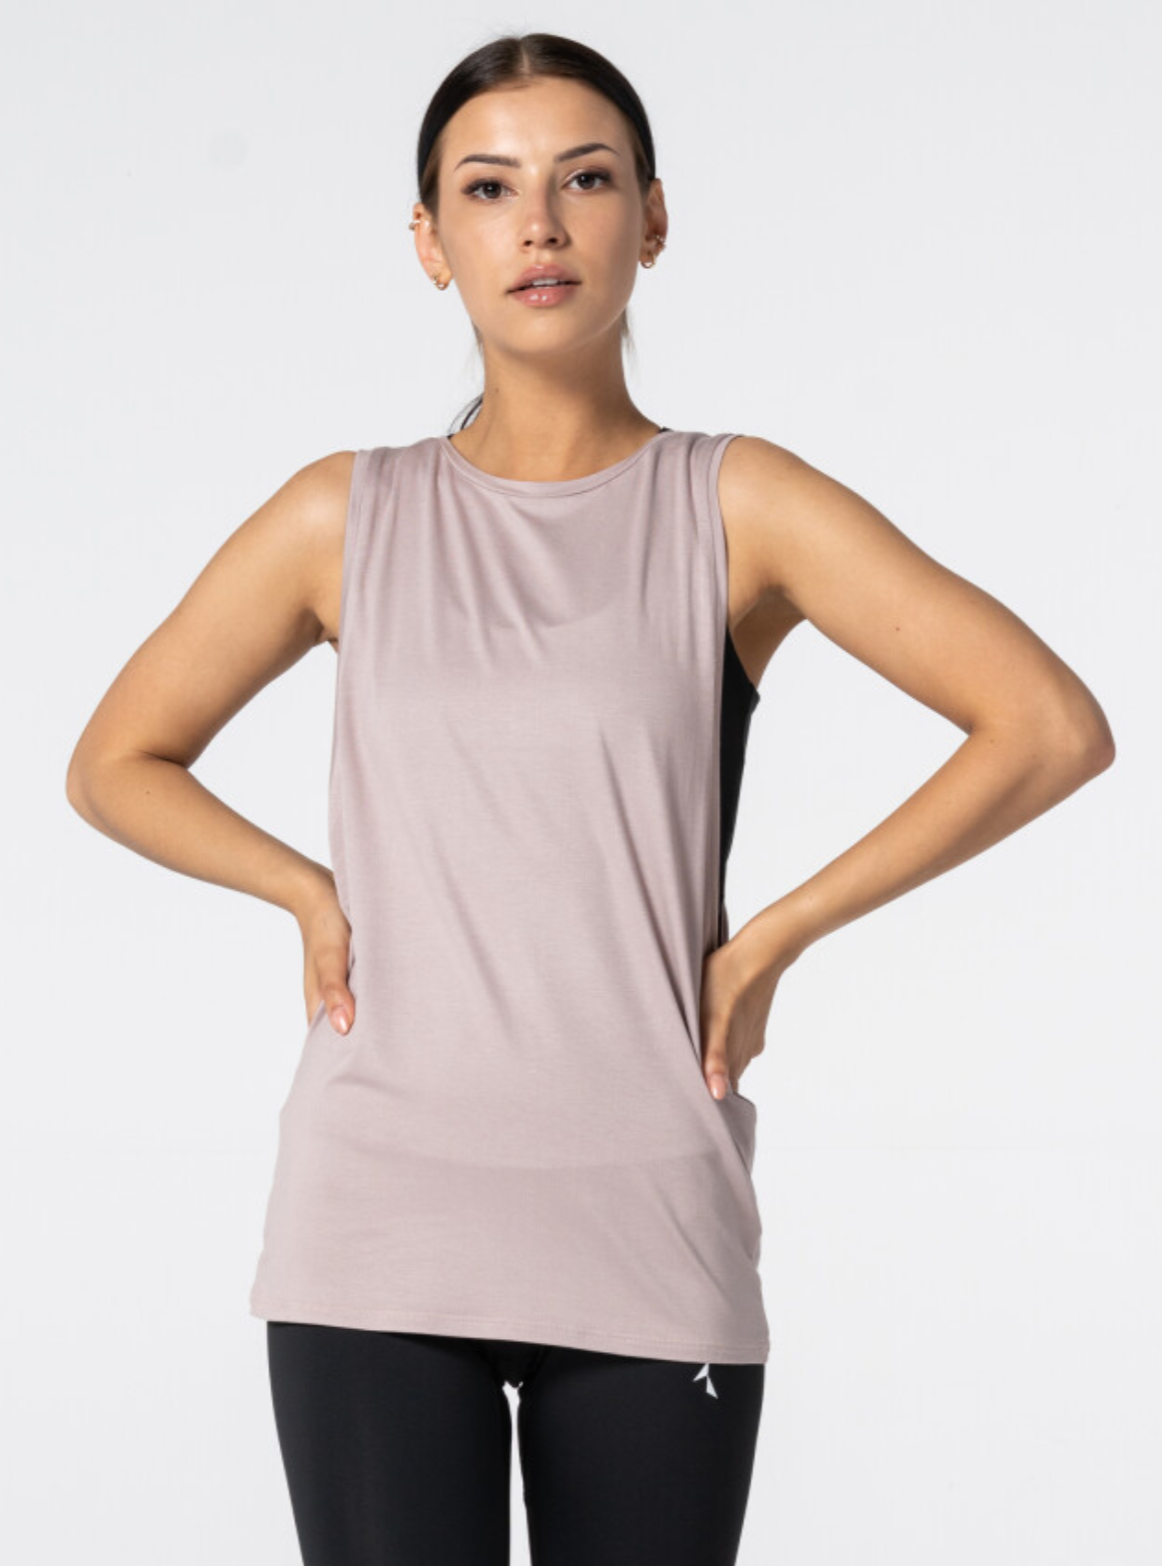 Carpatree Depp Tank Top - Taupe / Pale pink sleeveless sports top with low arm holes. Made of cool and breathable viscose fabric.